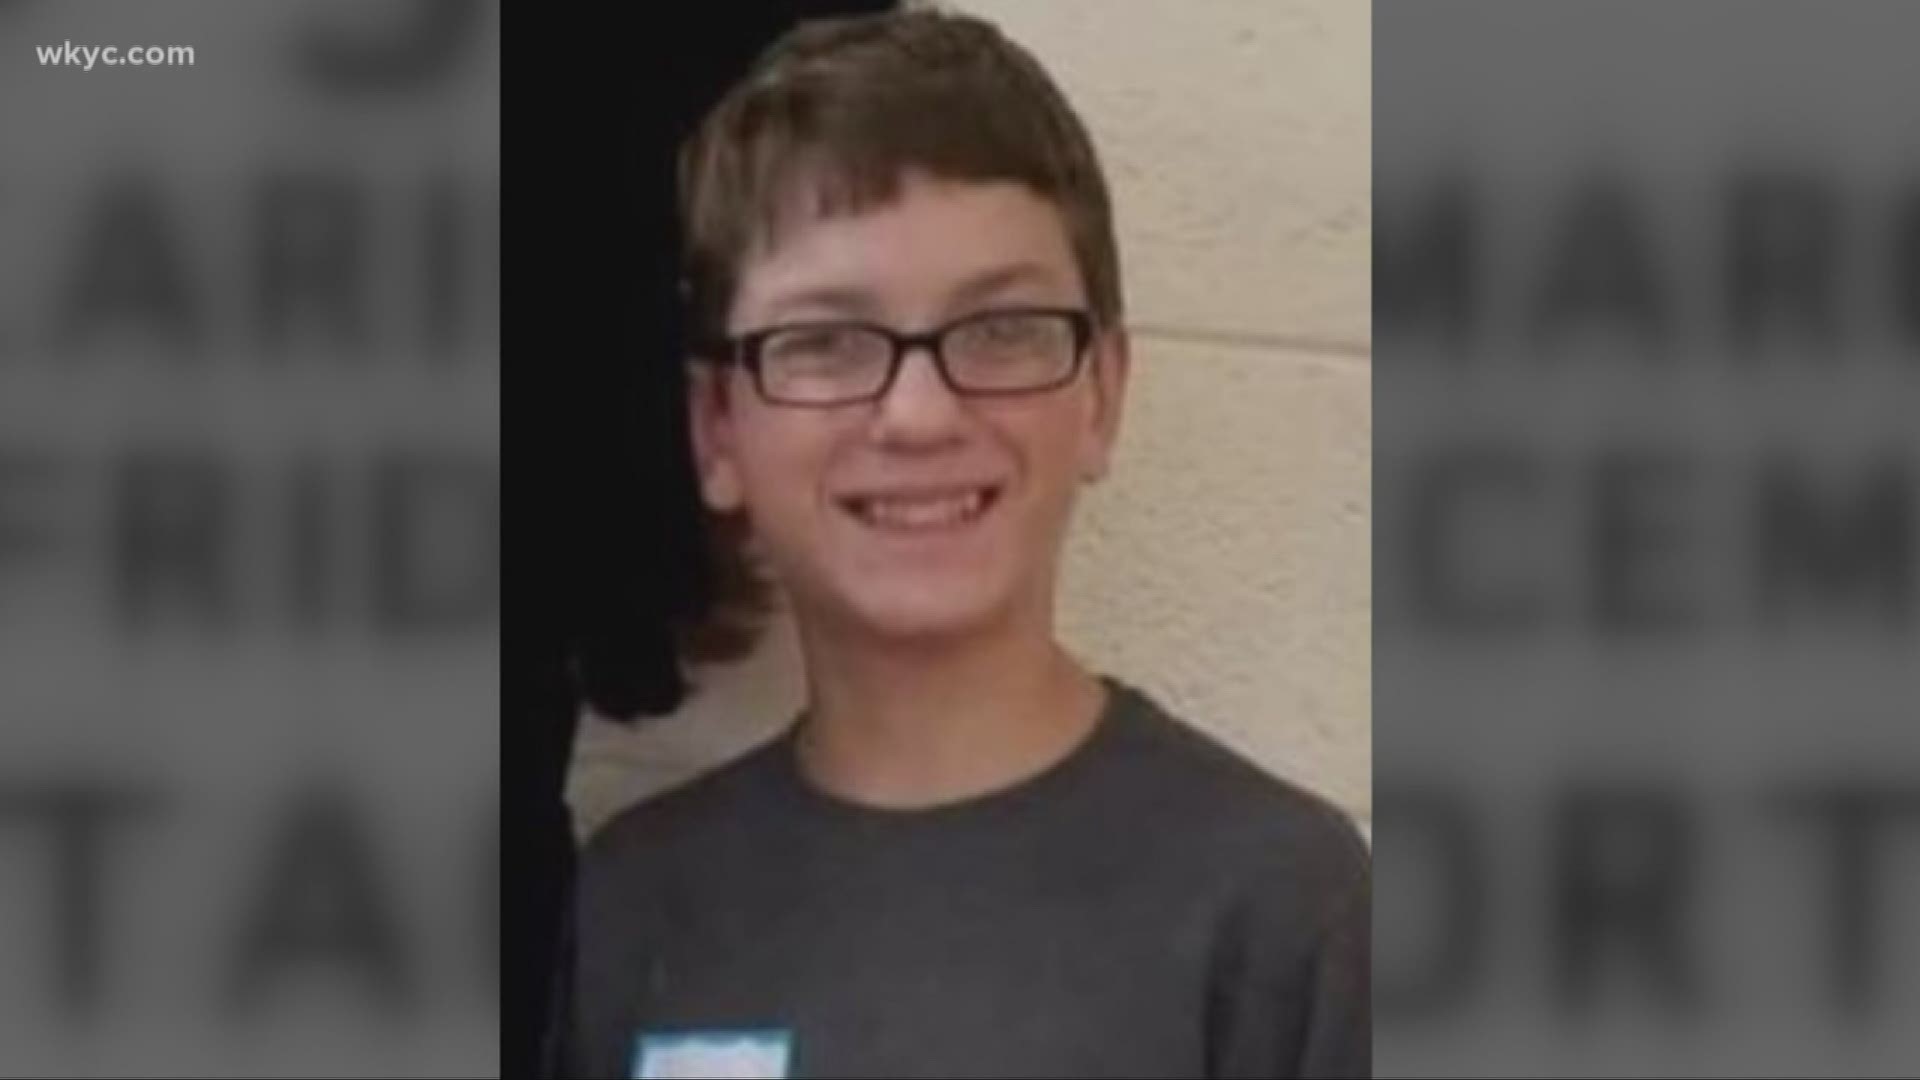 Police say they have no leads in the case of a missing Port Clinton teen. The reward for information to the discovery of Harley Dilly is $7,000.